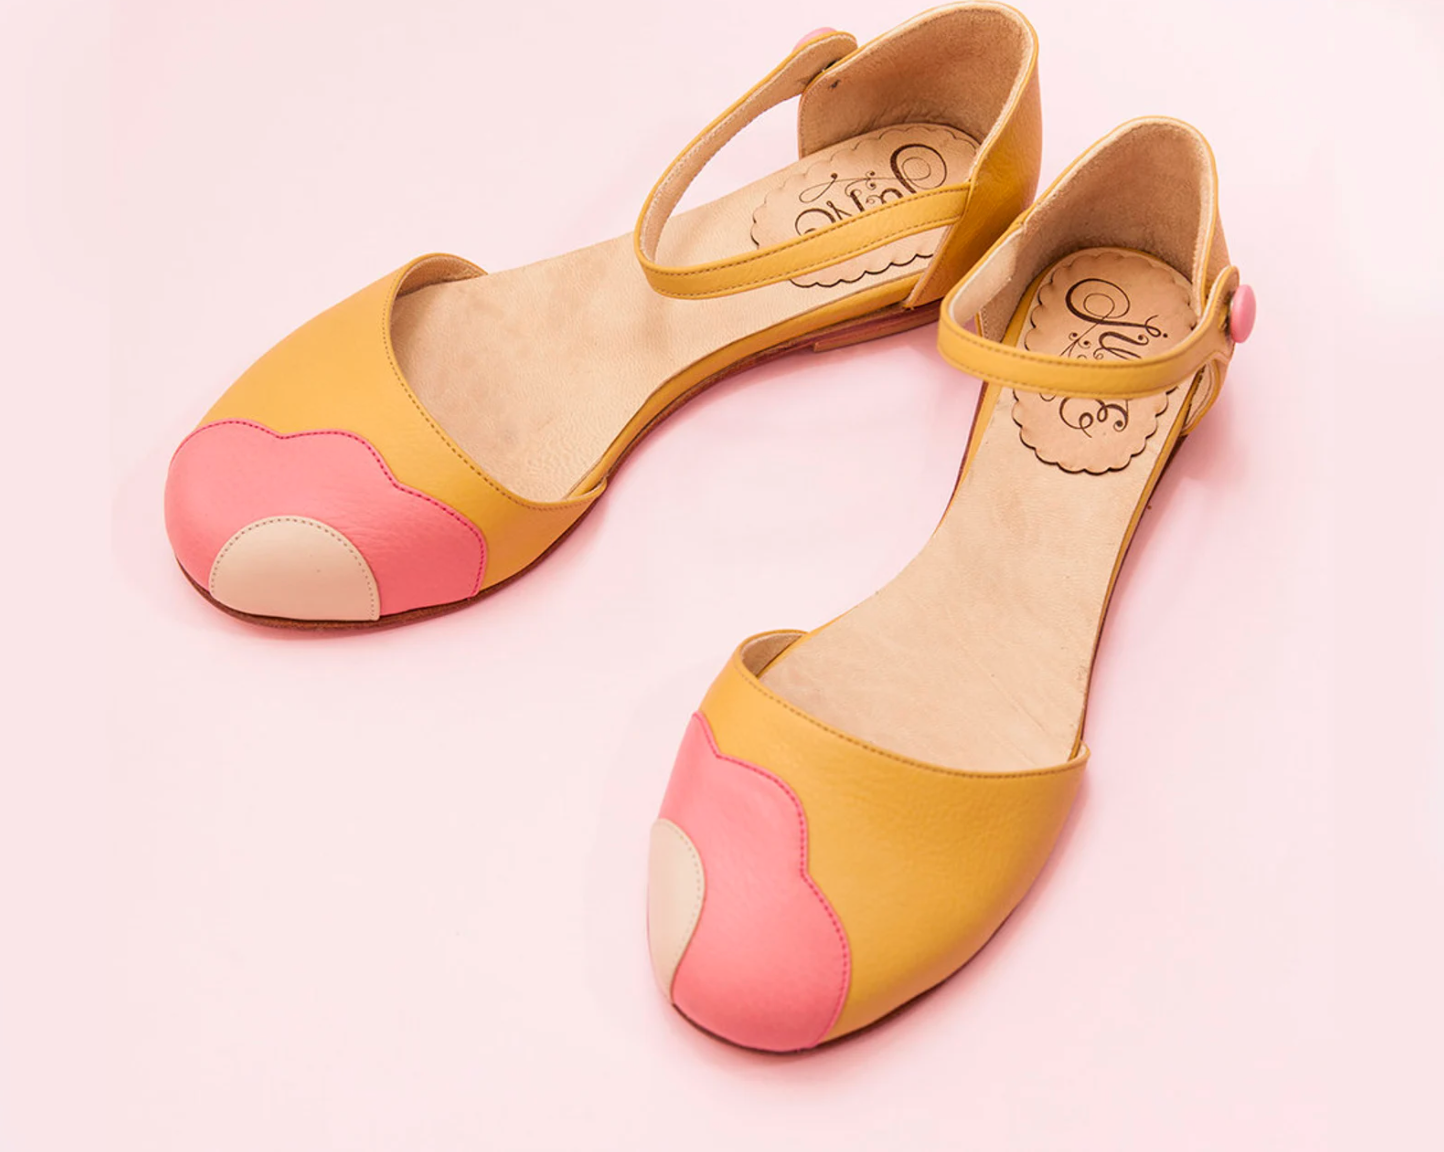 yellow buckle flats with pink flower-like shape on the toe bed